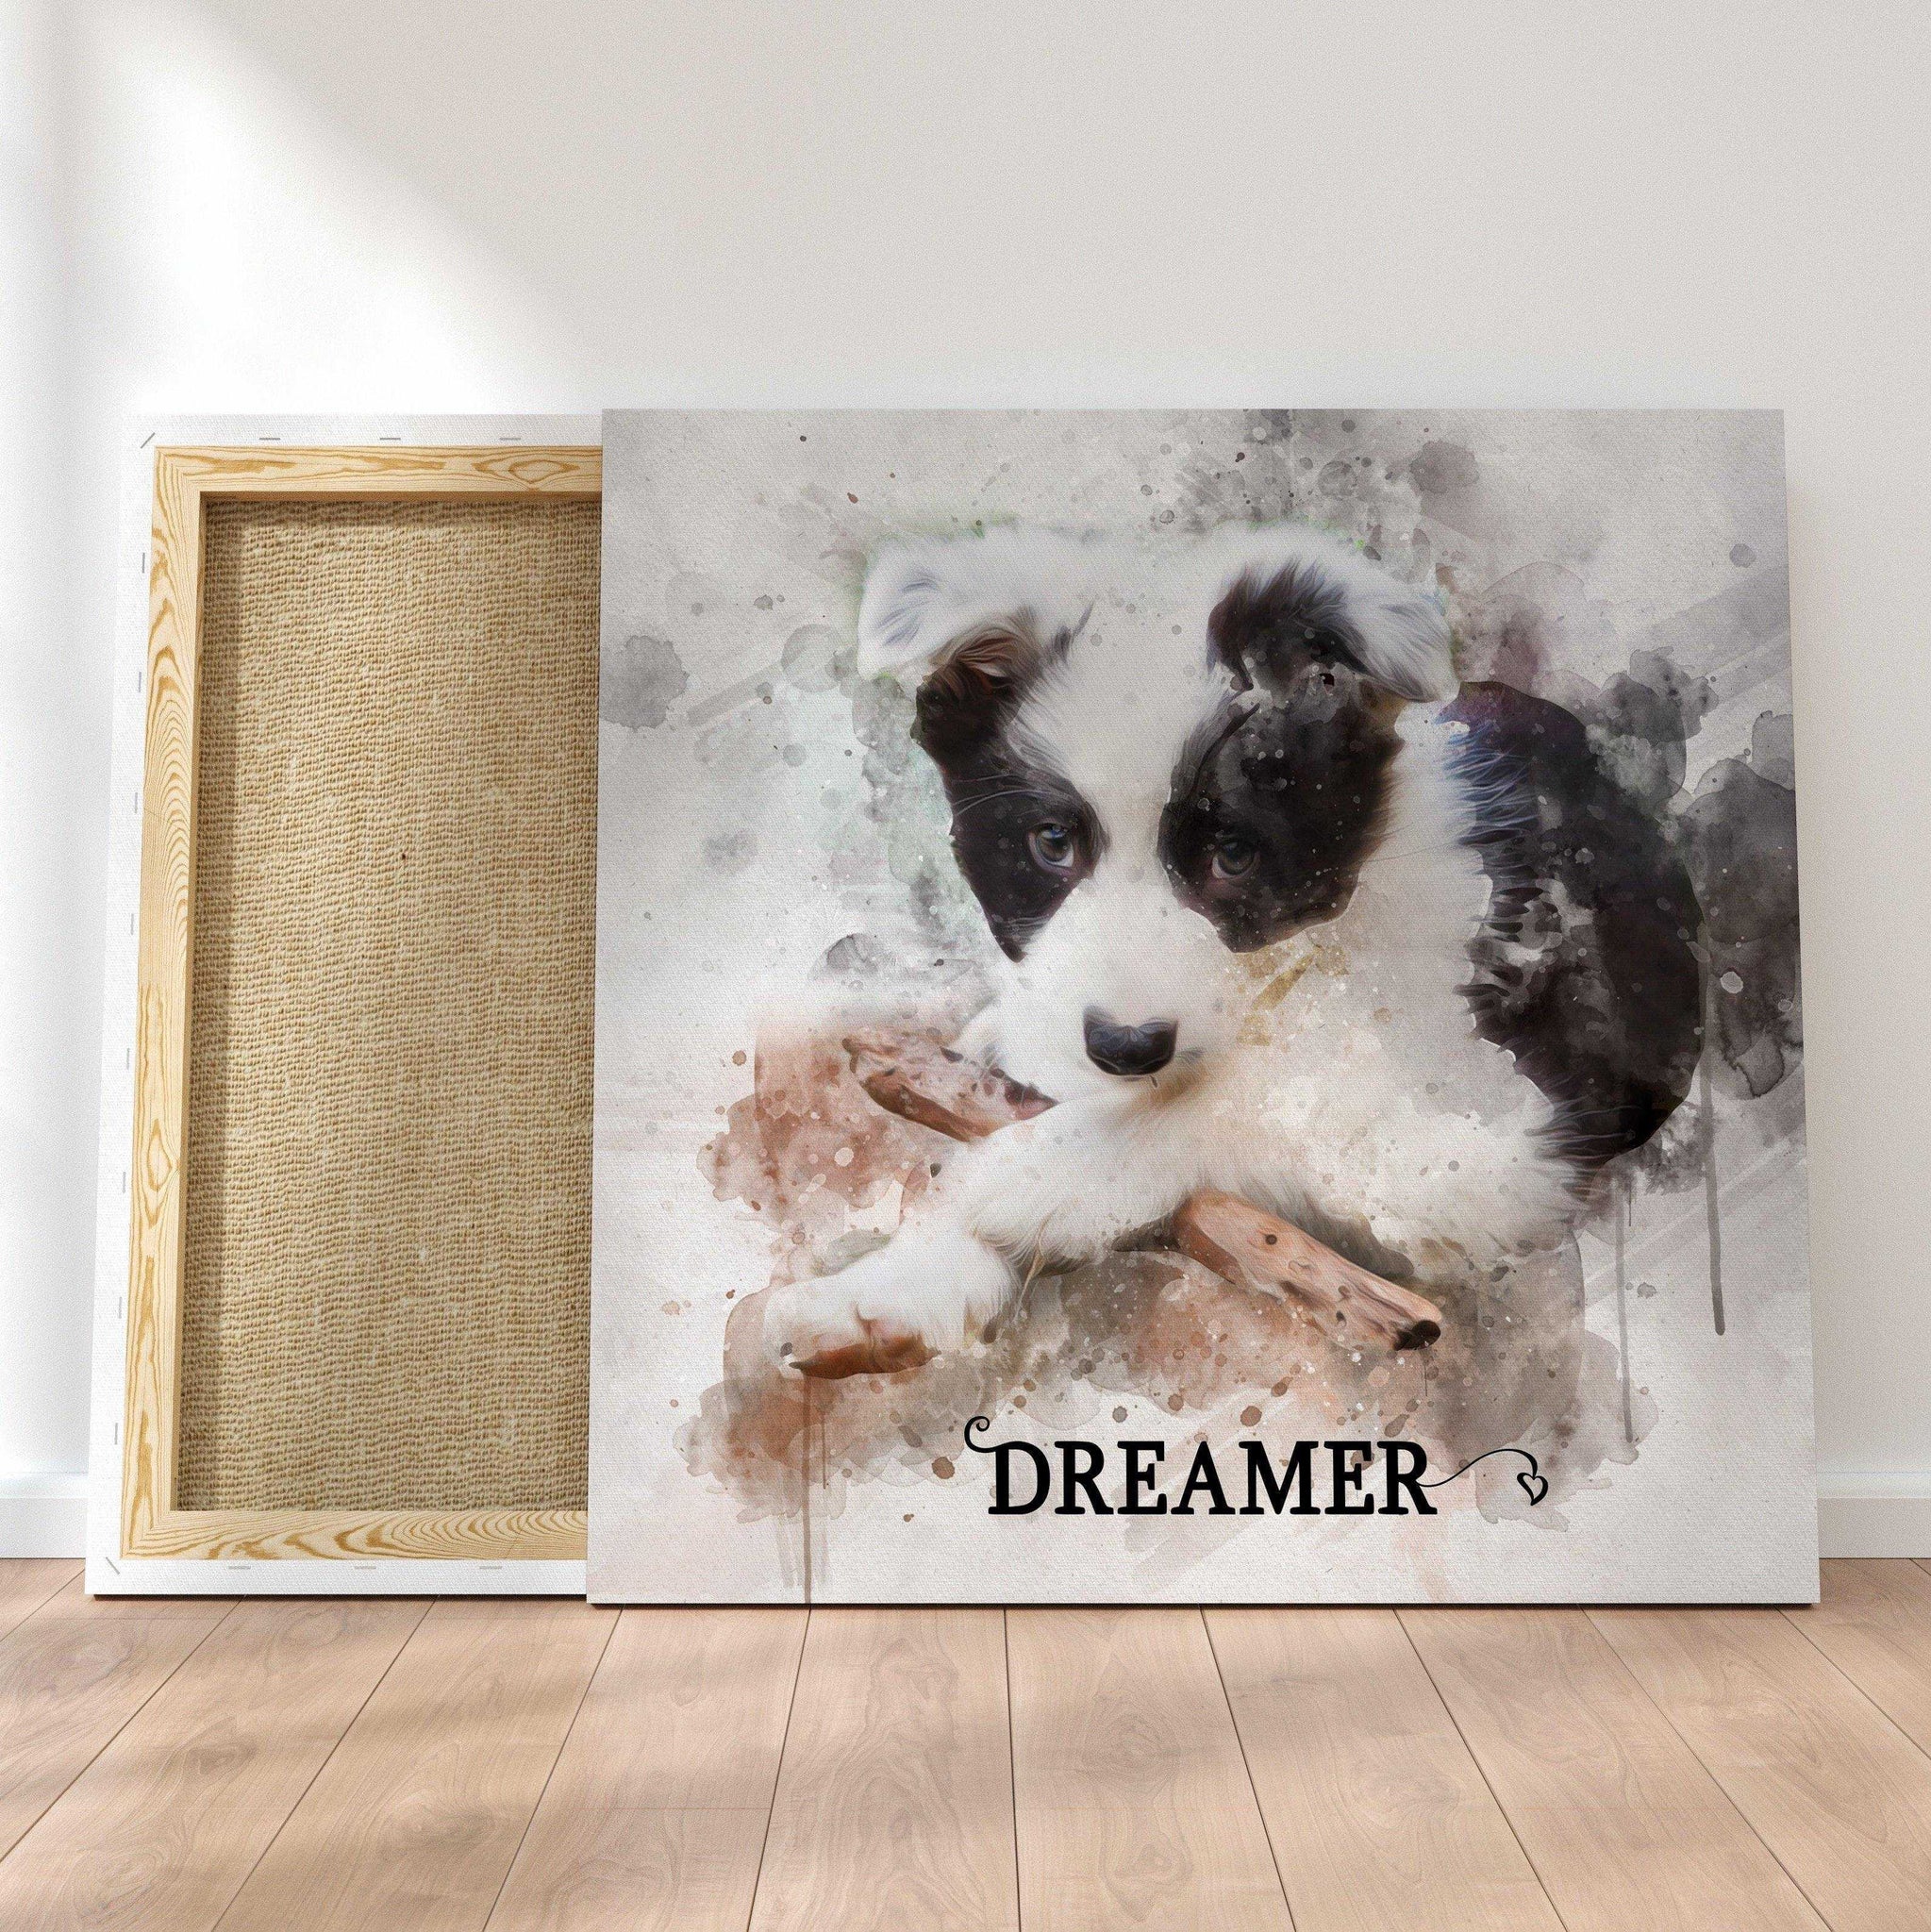 Pet Painting, Custom Pet Painting from Photo, Pet Paintings on Canvas - FromPicToArt